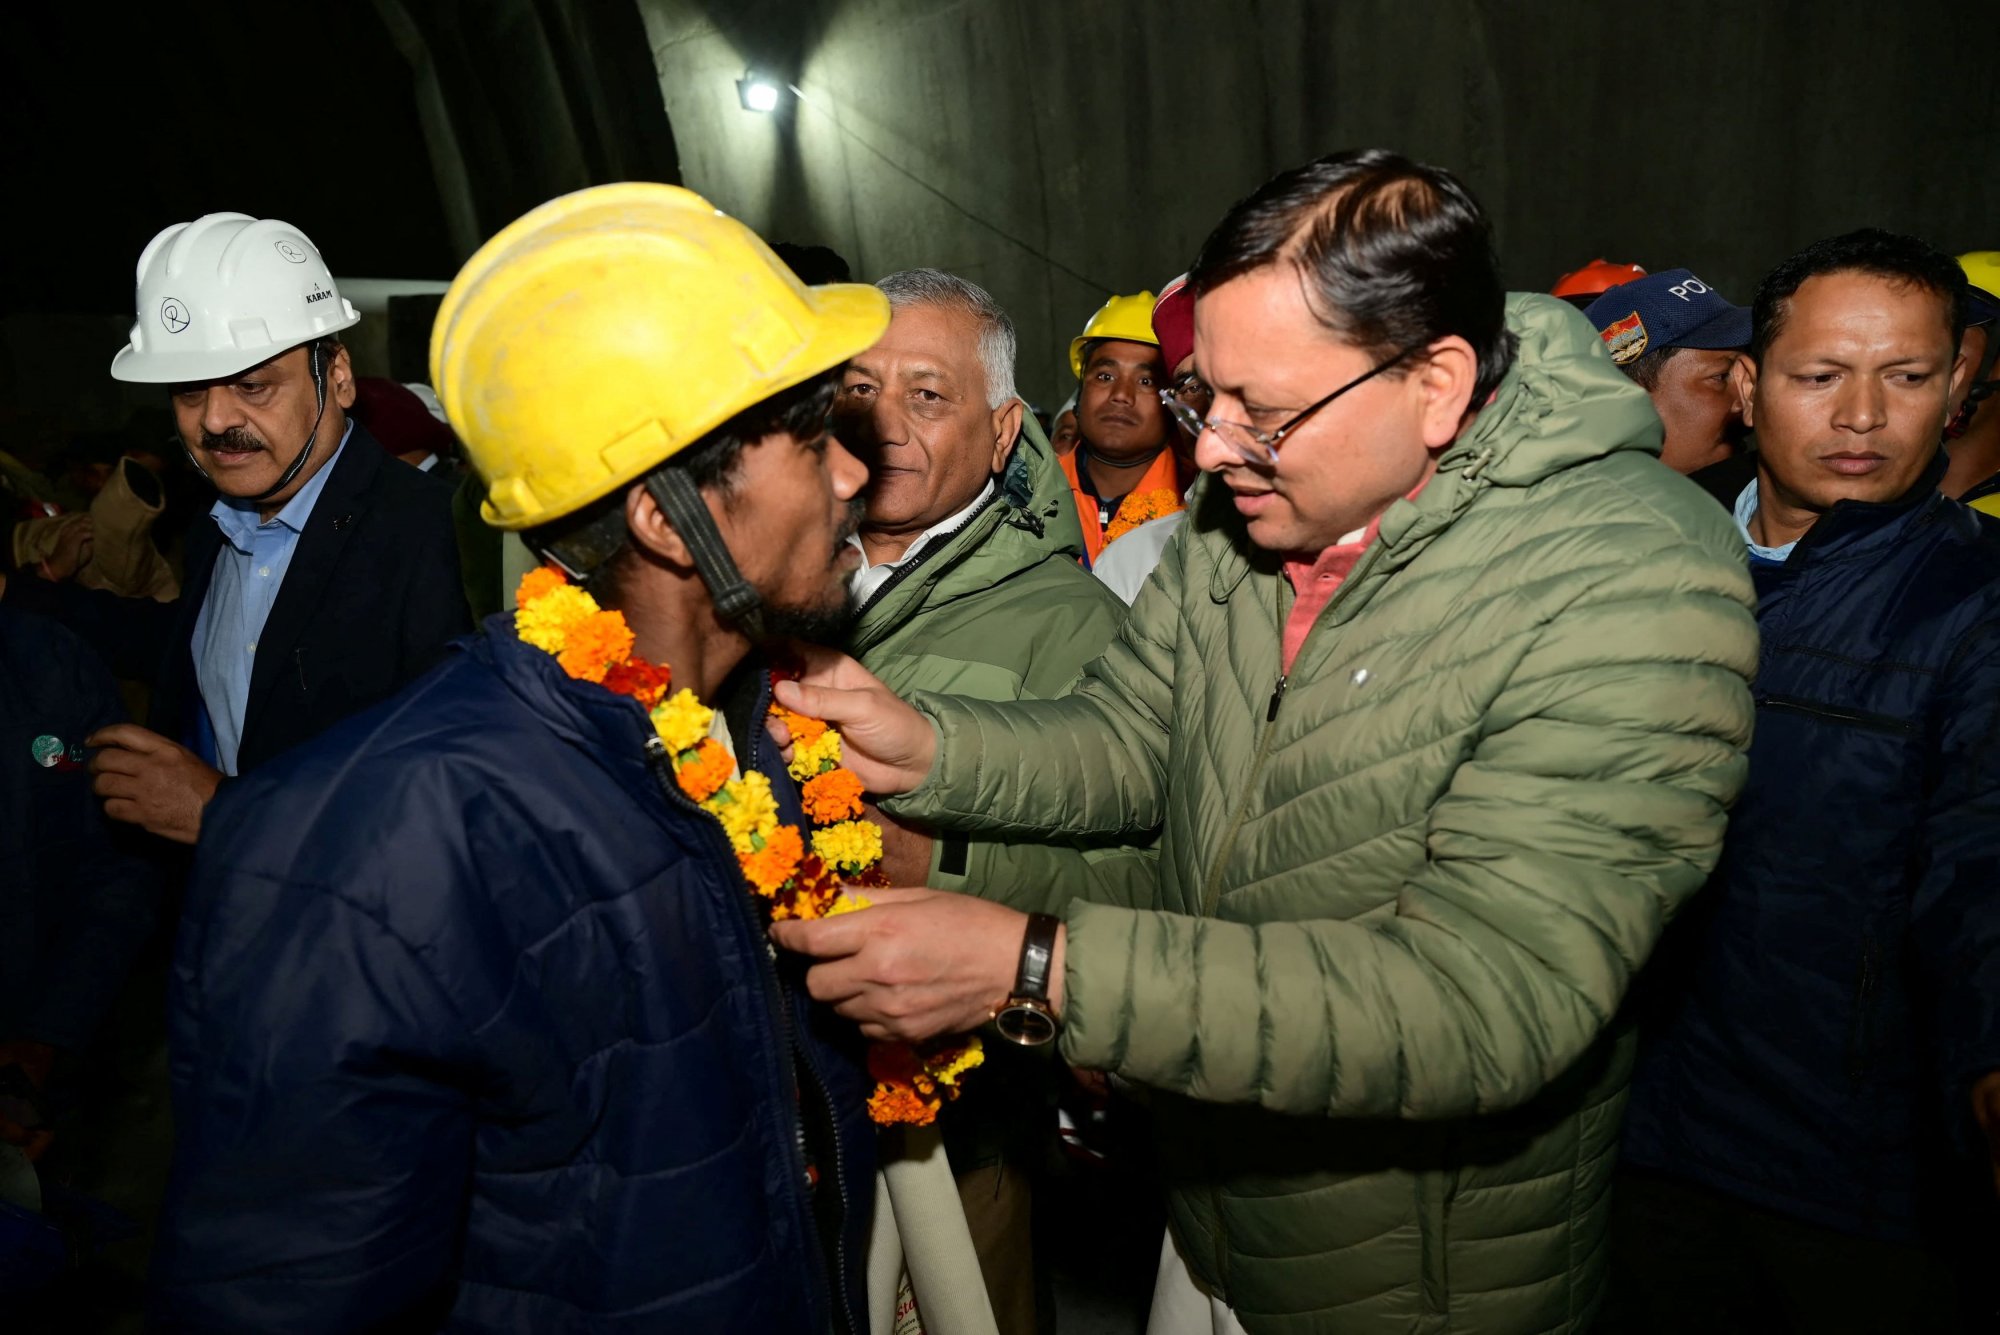 2023 11 28T212138Z 175062671 RC2LM4A530Q4 RTRMADP 5 INDIA TUNNEL COLLAPSE.jpg